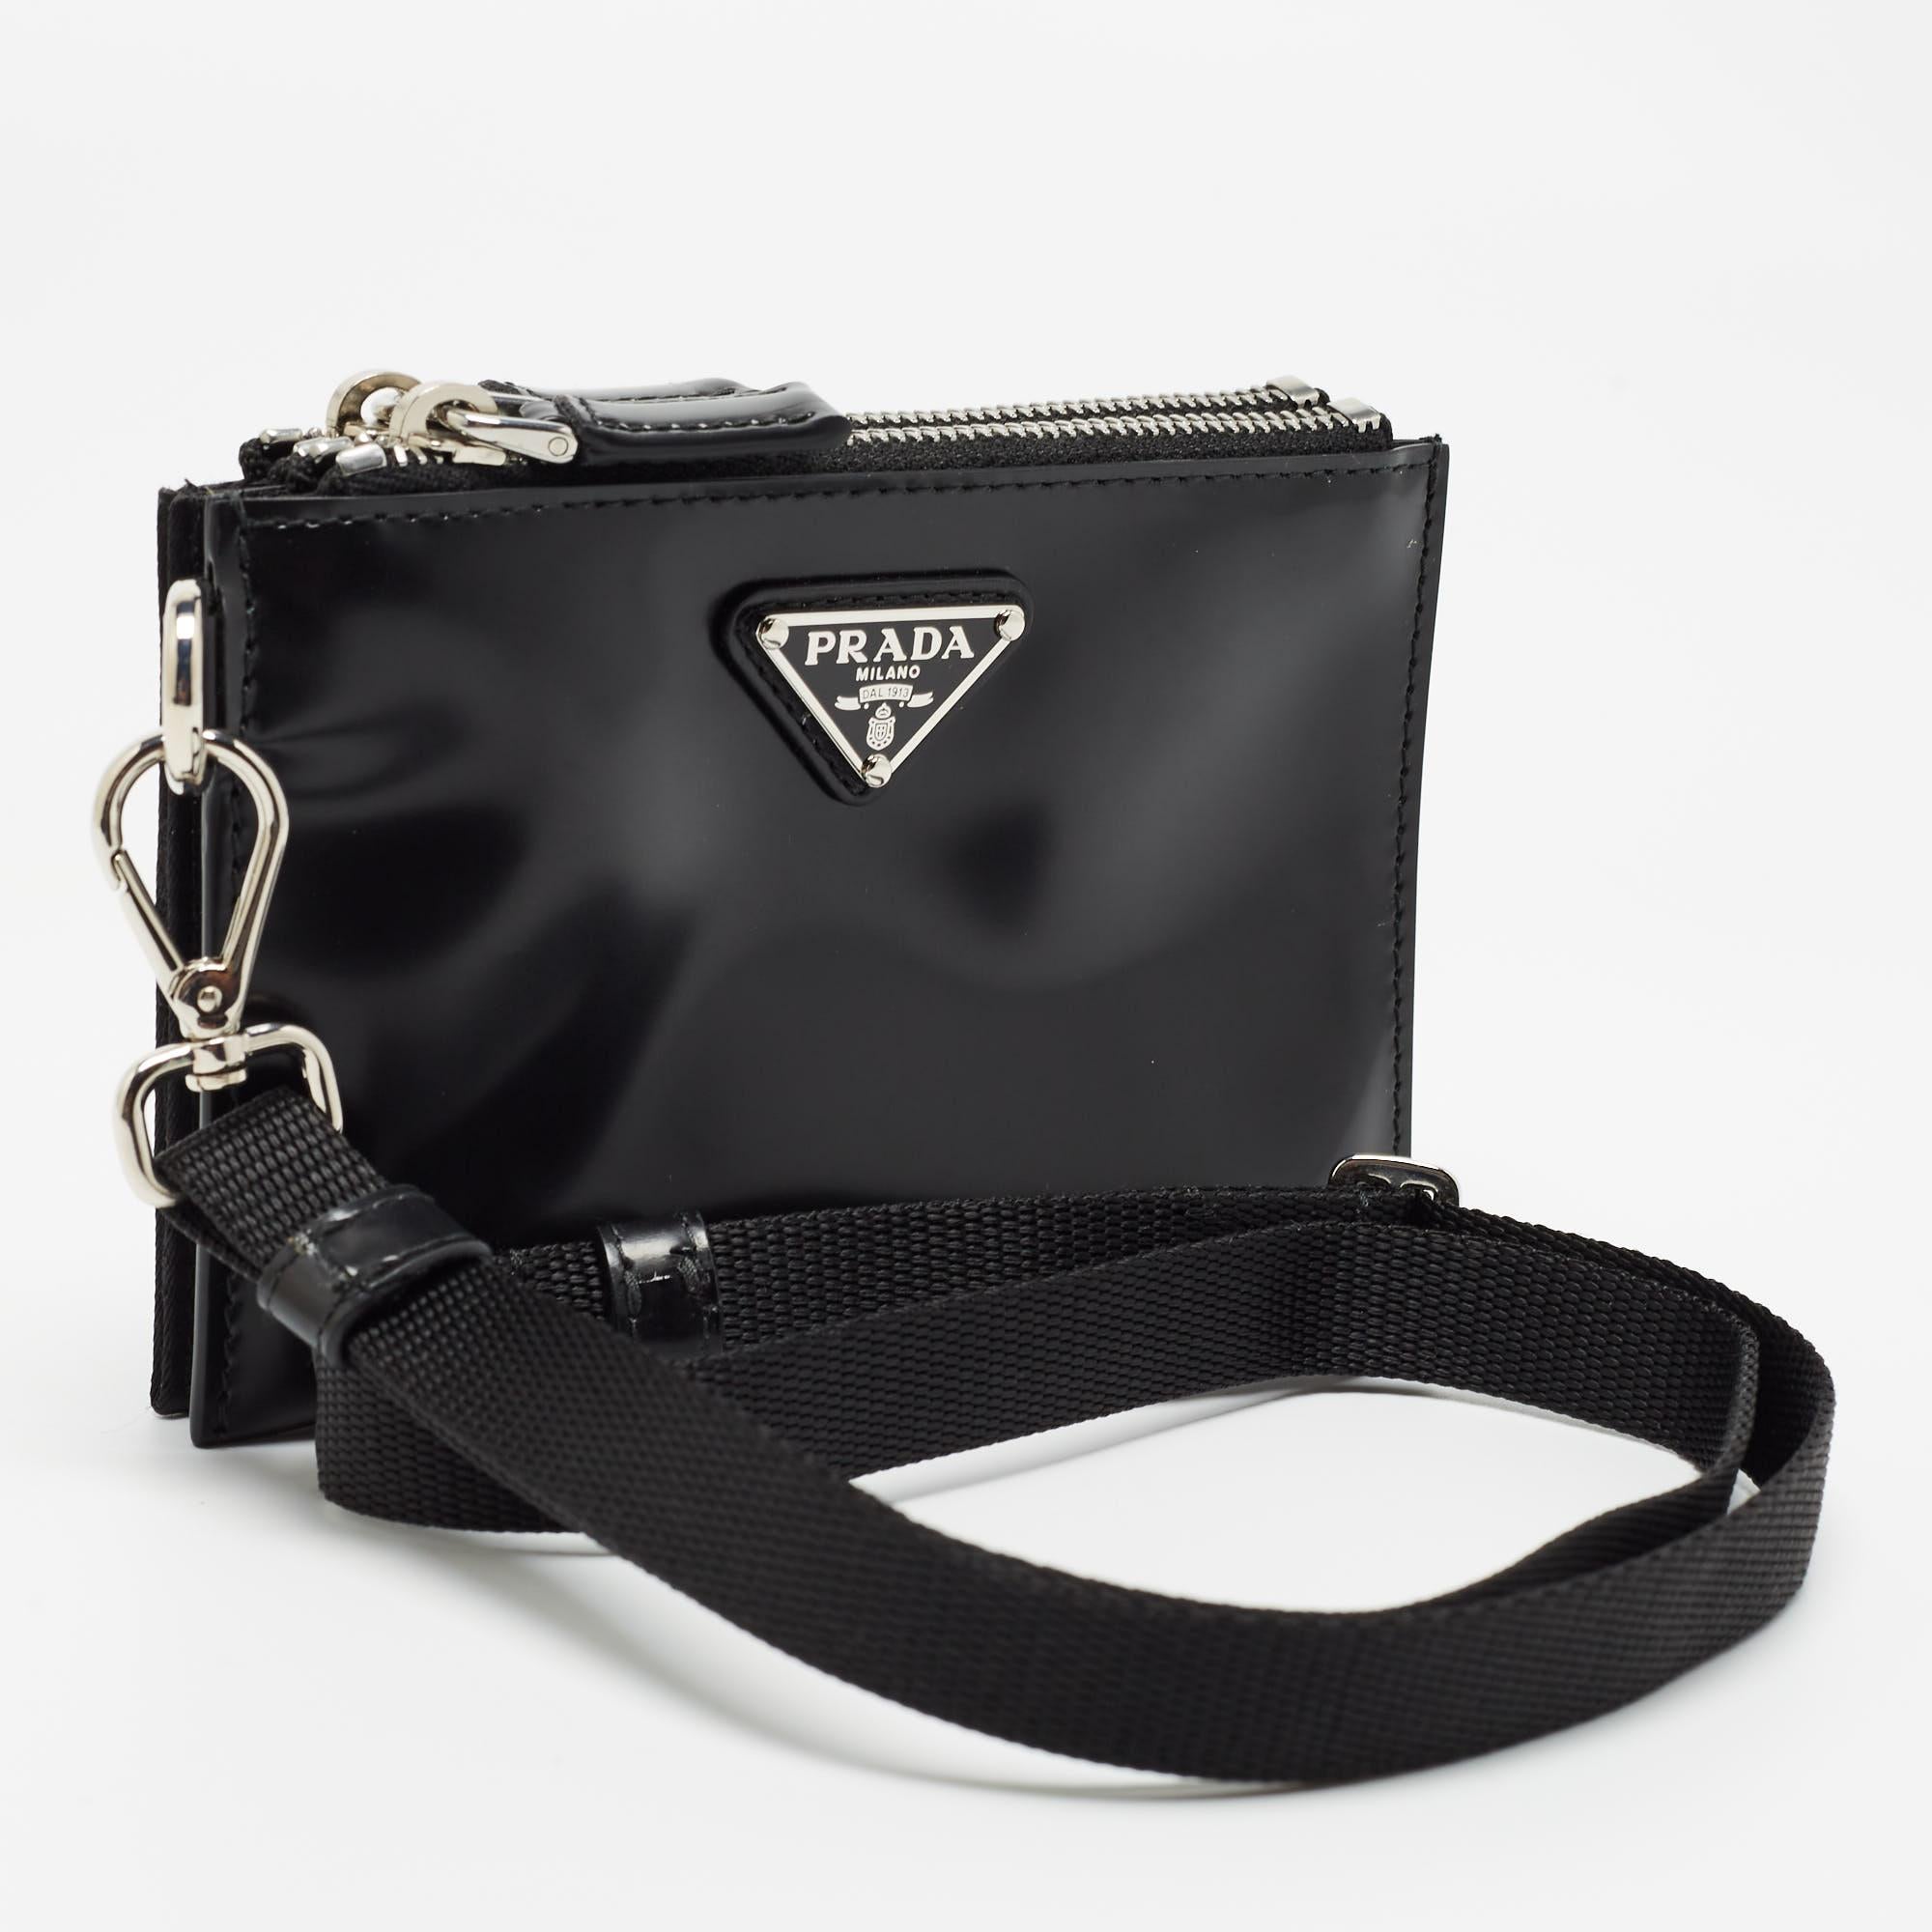 Prada Black Brushed Leather and Nylon Wristlet Pouch In Excellent Condition For Sale In Dubai, Al Qouz 2